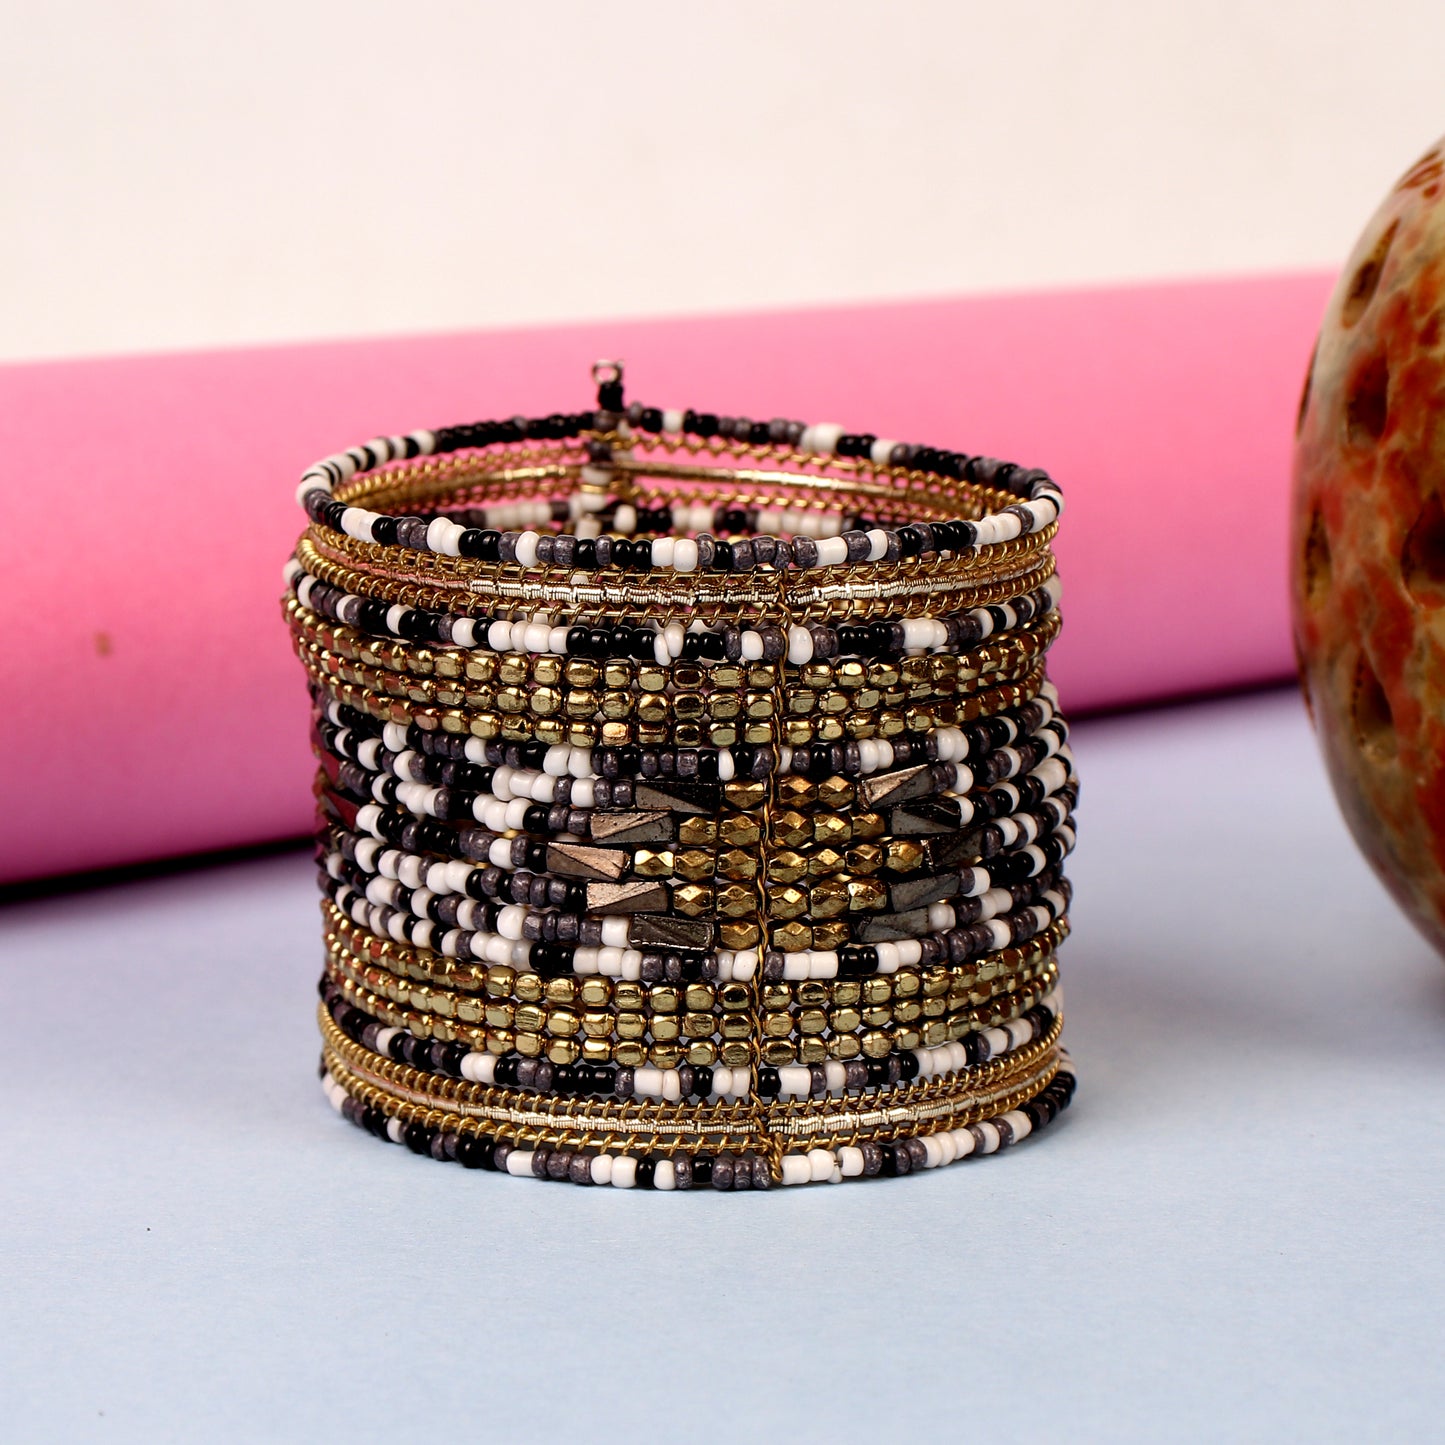 The Vivid Glowing Bangle in Shades of Black